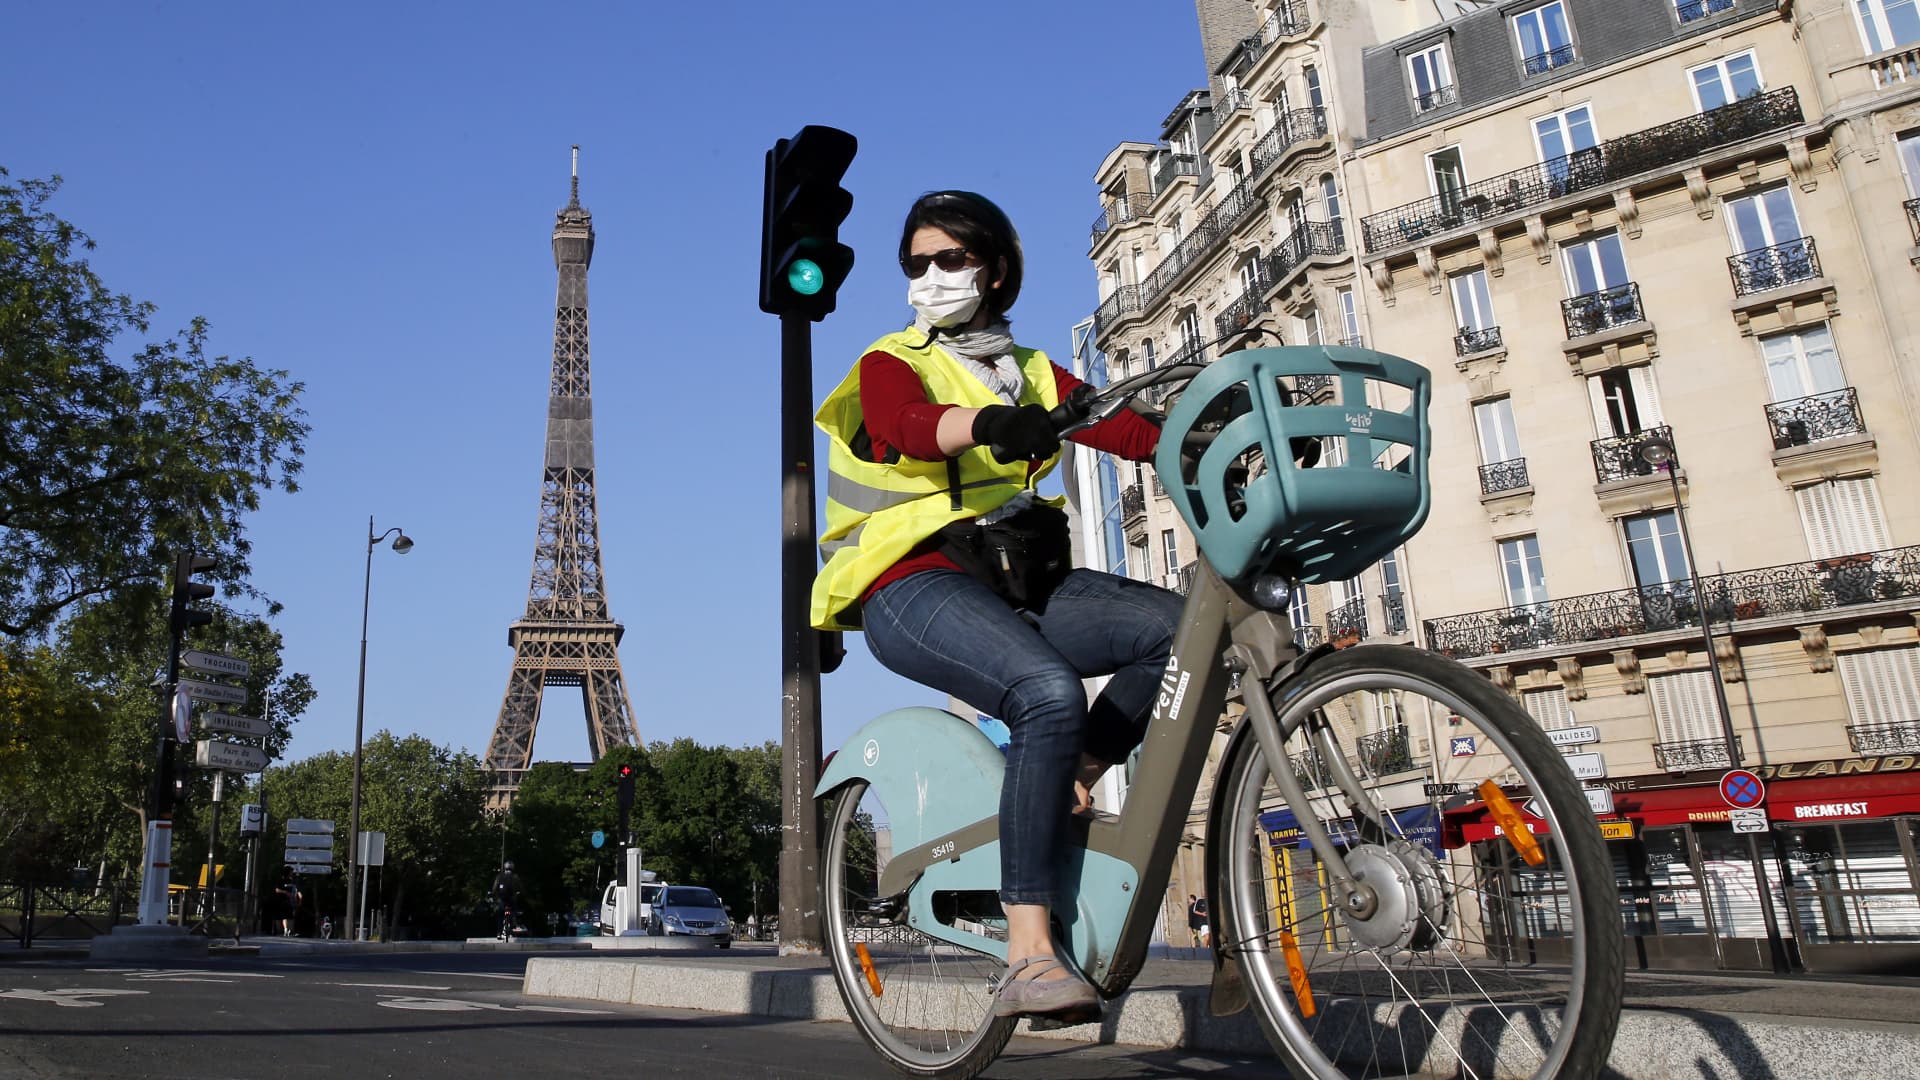 A woman wearing a protective mask rides her bicycle next to the Eiffel Tower on April 23, 2020 in Paris, France.